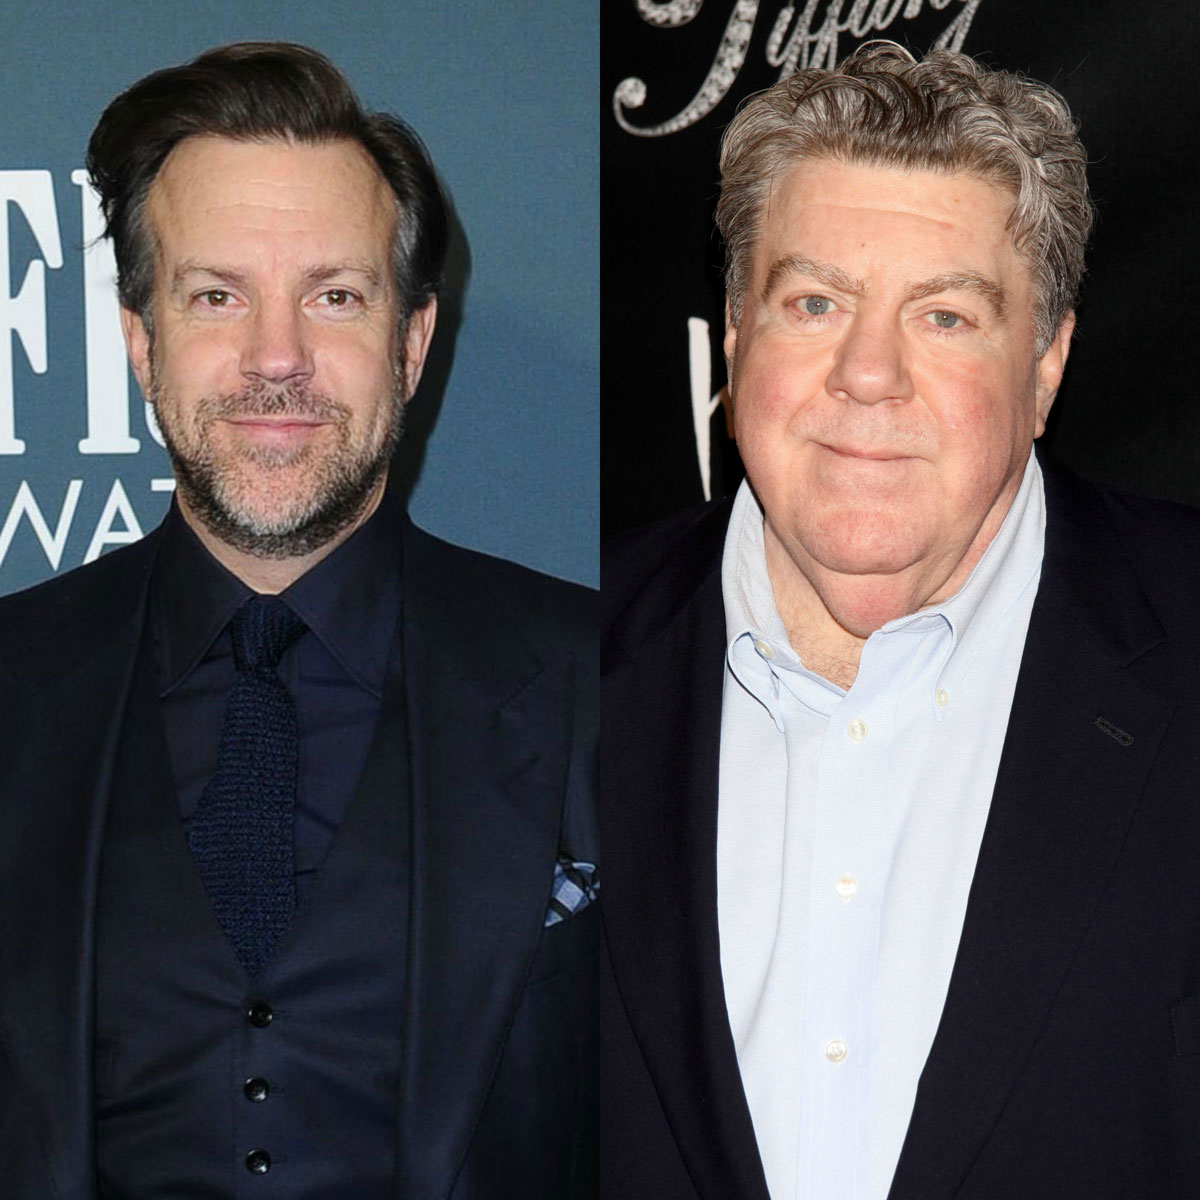 Jason Sudeikis and George Wendt are related